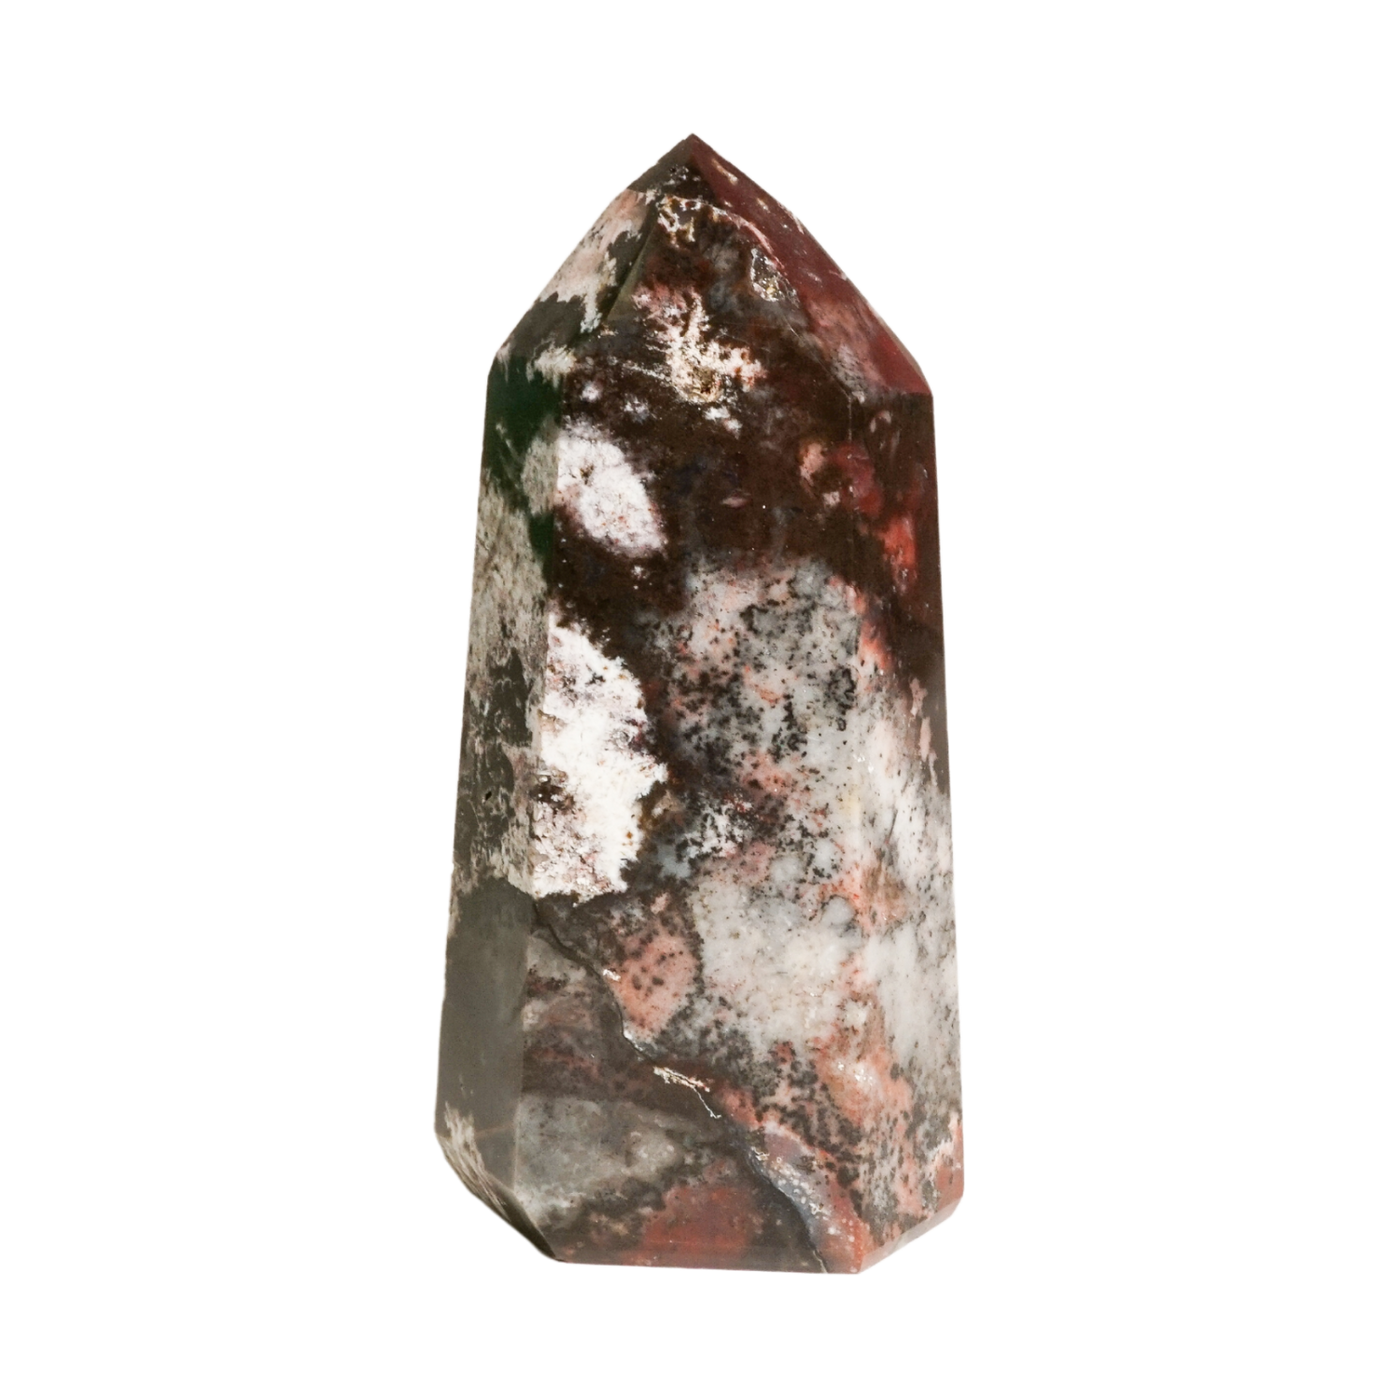 Closeup view of Energy Muse's genuine Mosaic Chalcedony healing crystal point displaying mottled and speckled irregular natural color pattern.